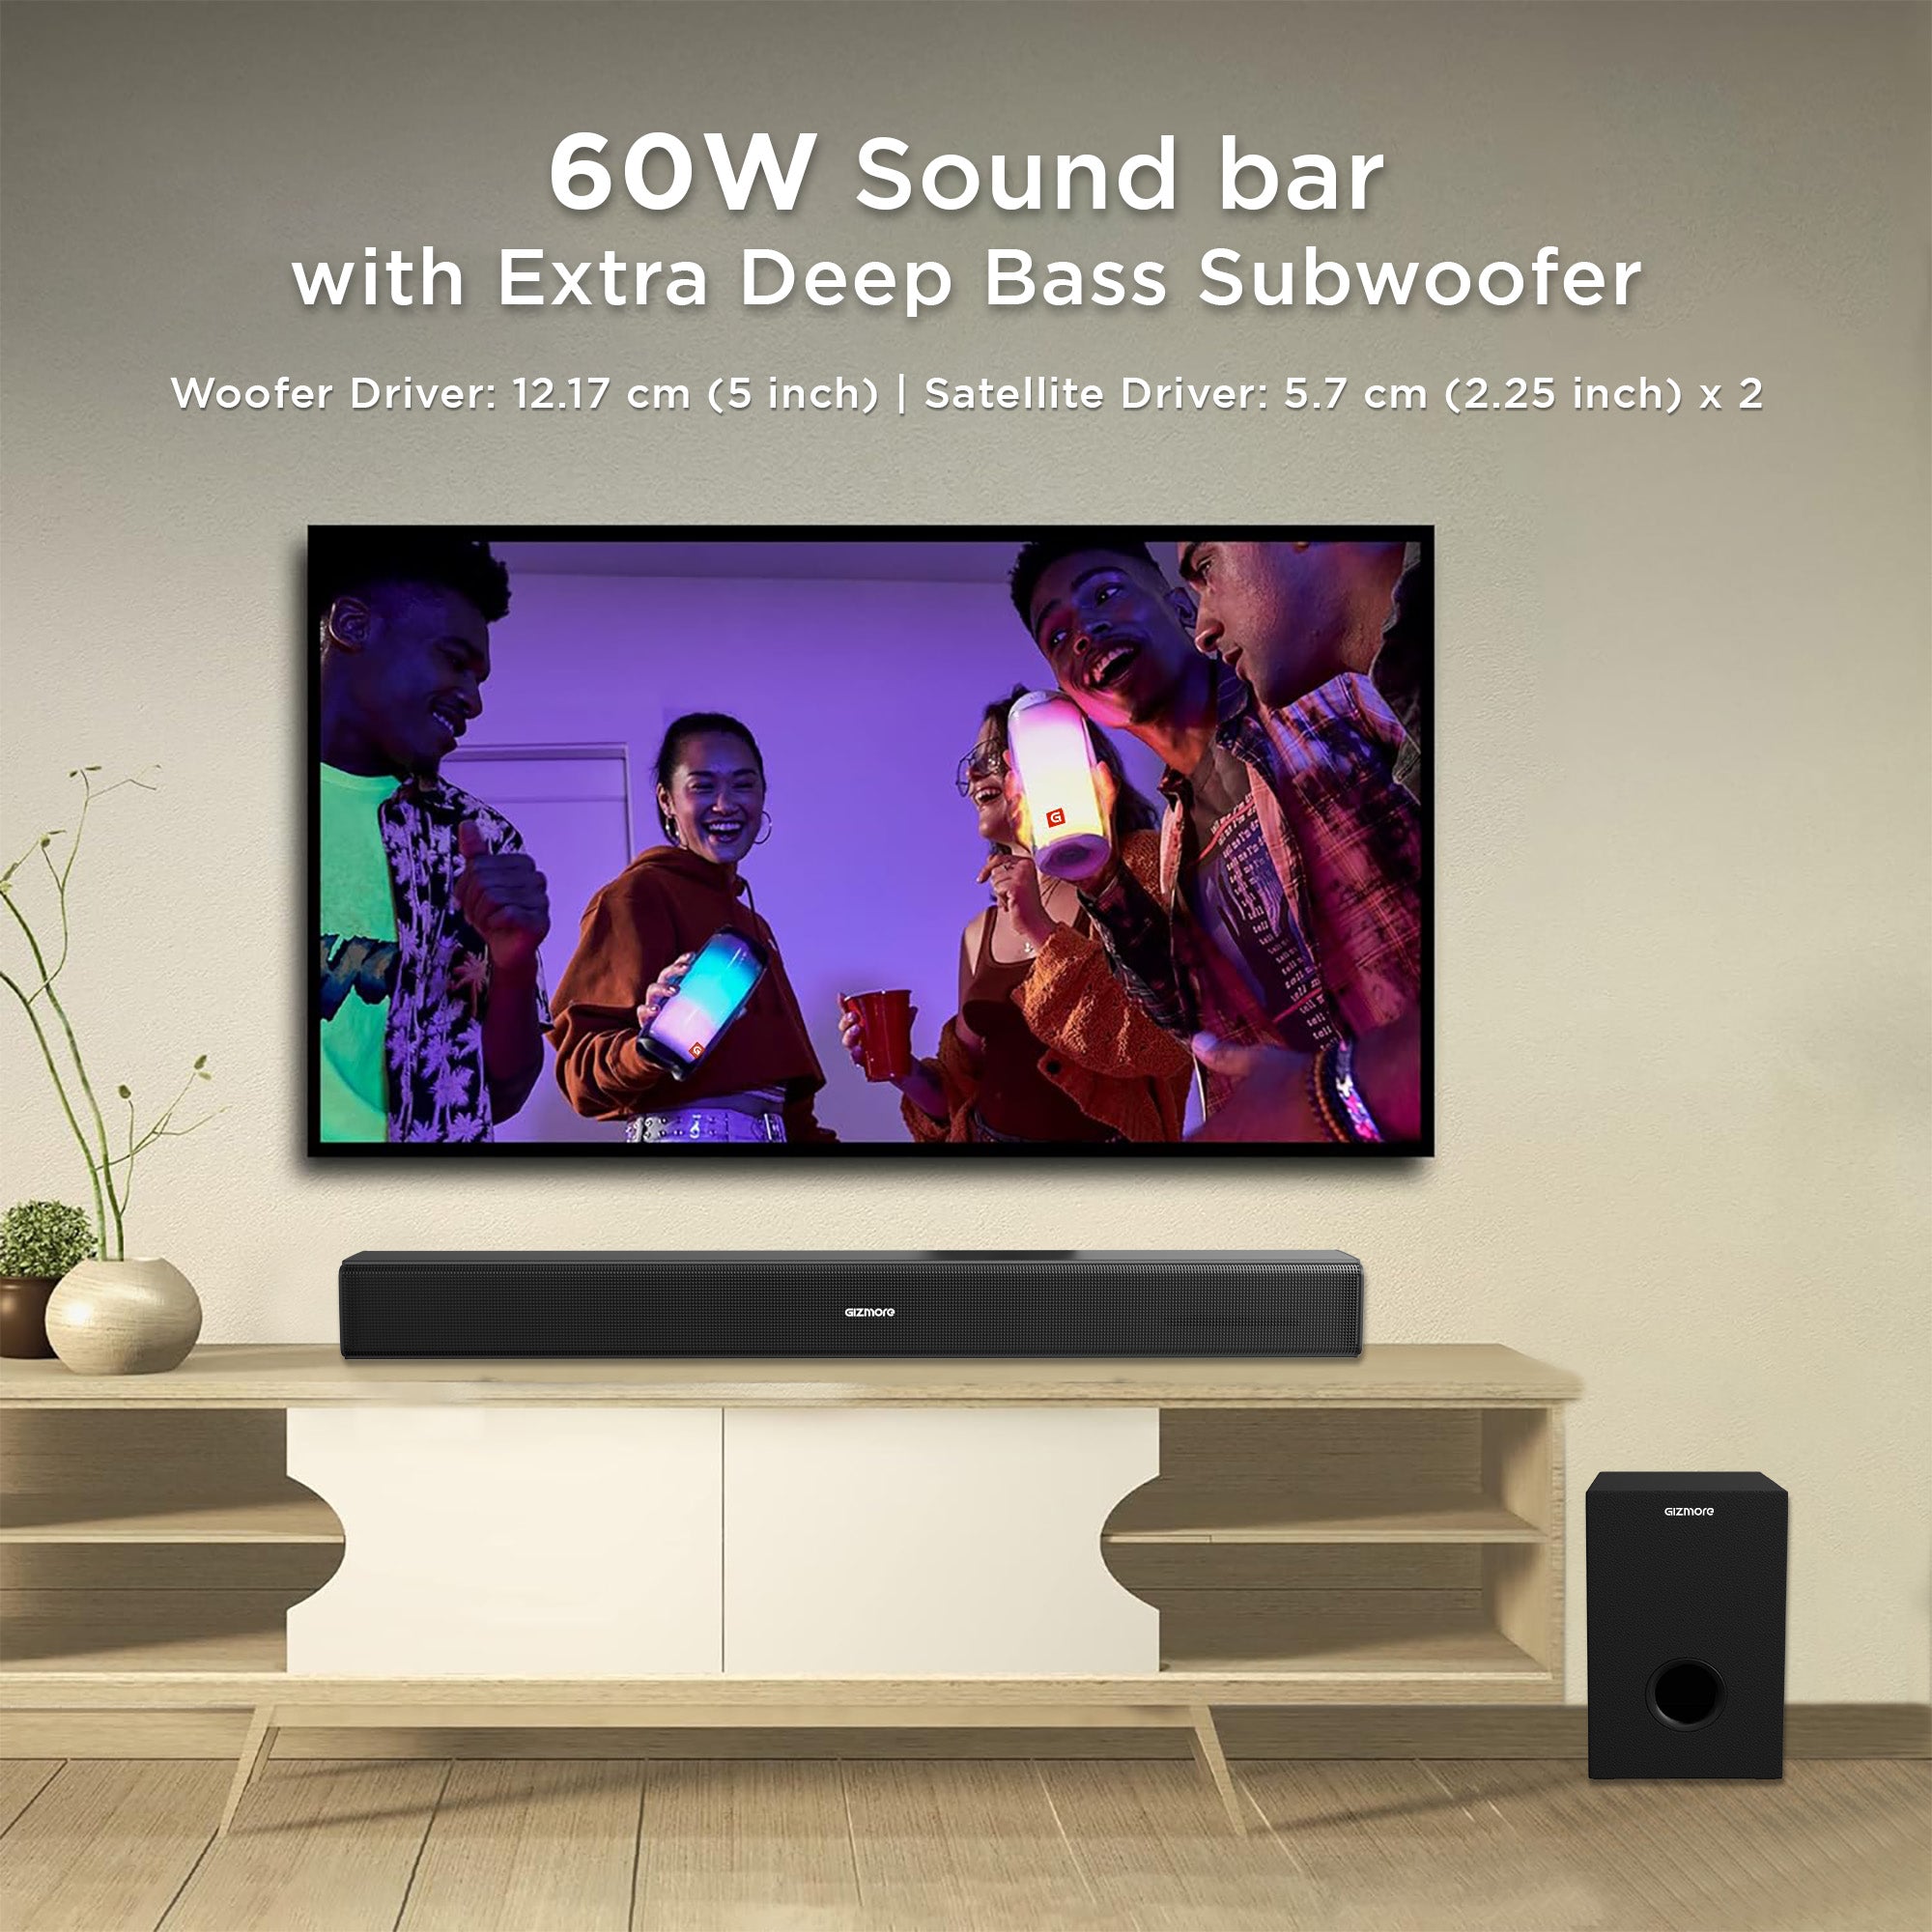 GIZMORE BAR6000 60W RMS Wired Soundbar with 360 Degree Surround Sound & Extra Deep Bass Subwoofer| Wall Mounted | Multi Connectivity & Remote Control connect with Mobile TV/PC and Projector